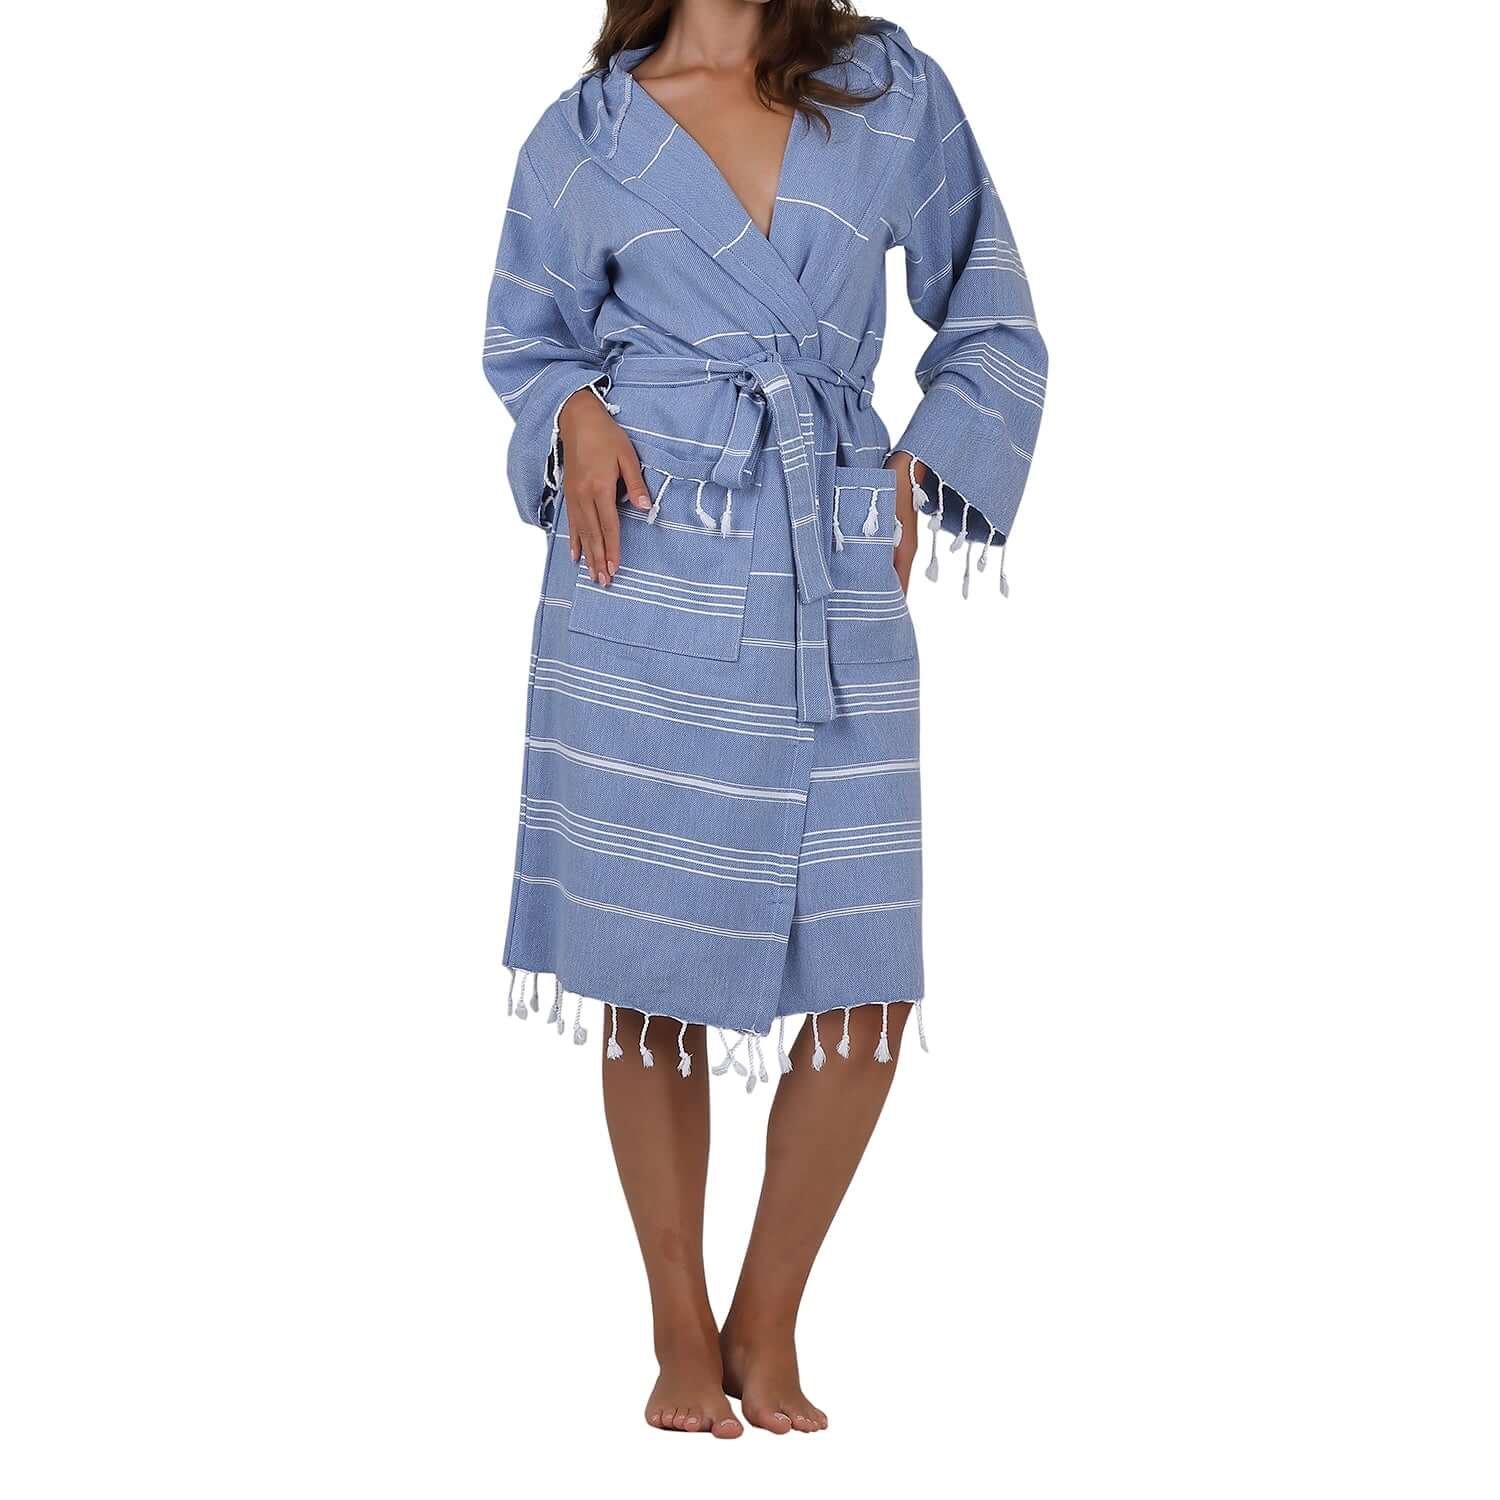  Woman wearing Loom Legacy xsmall/small blue bathrobe with white stripes and fringe detailing at the bottom.